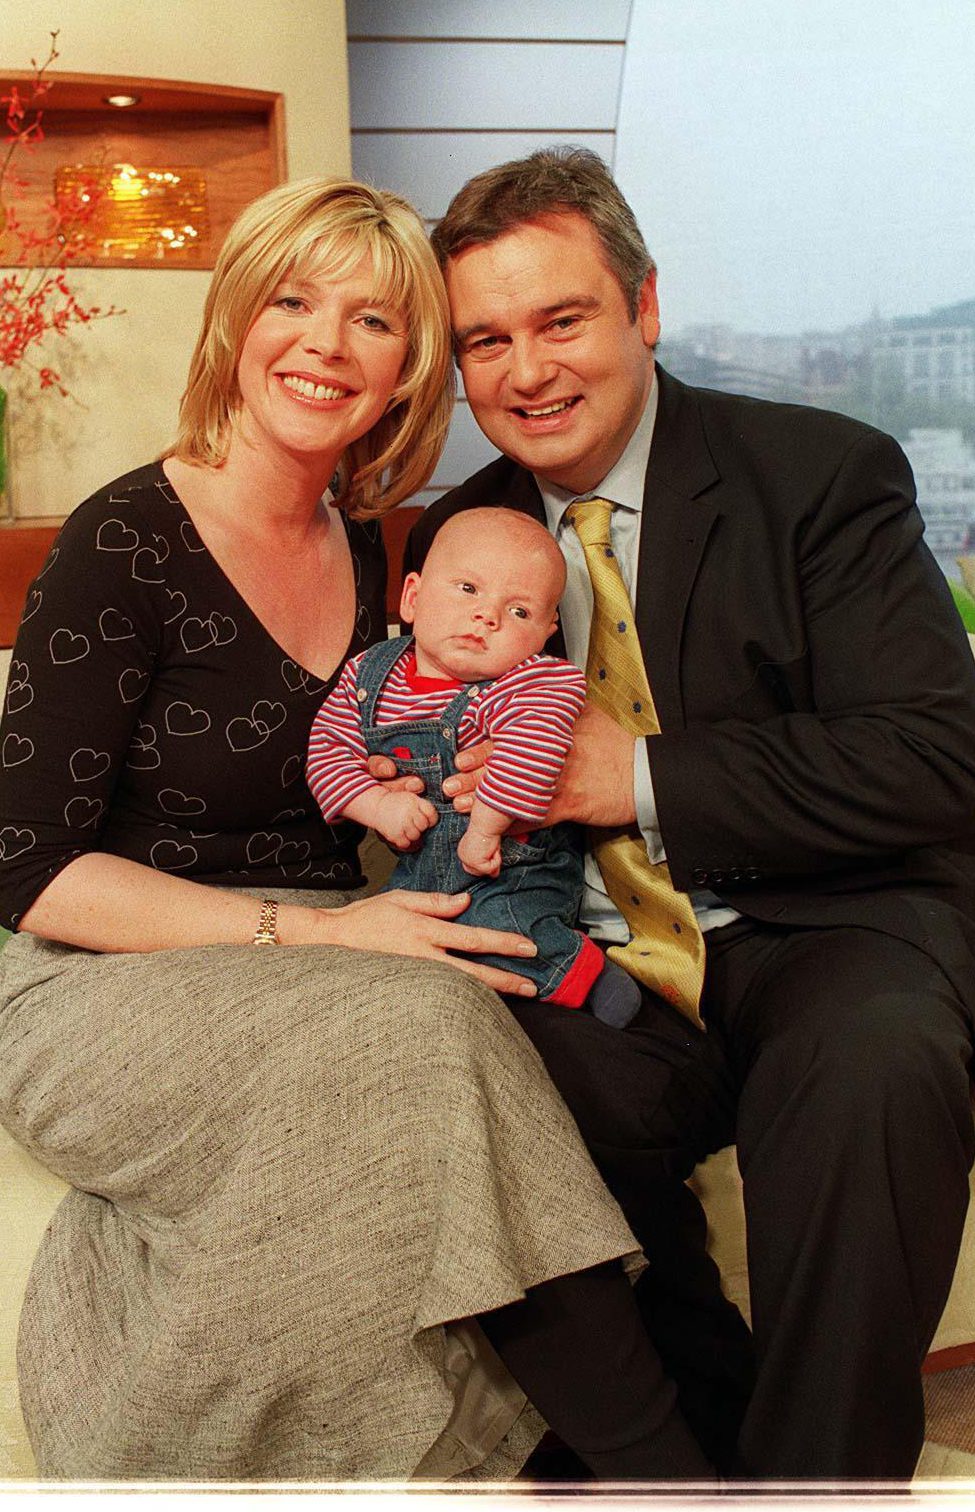 Eamonn Holmes' First Wife: Who is Gabrielle Holmes?